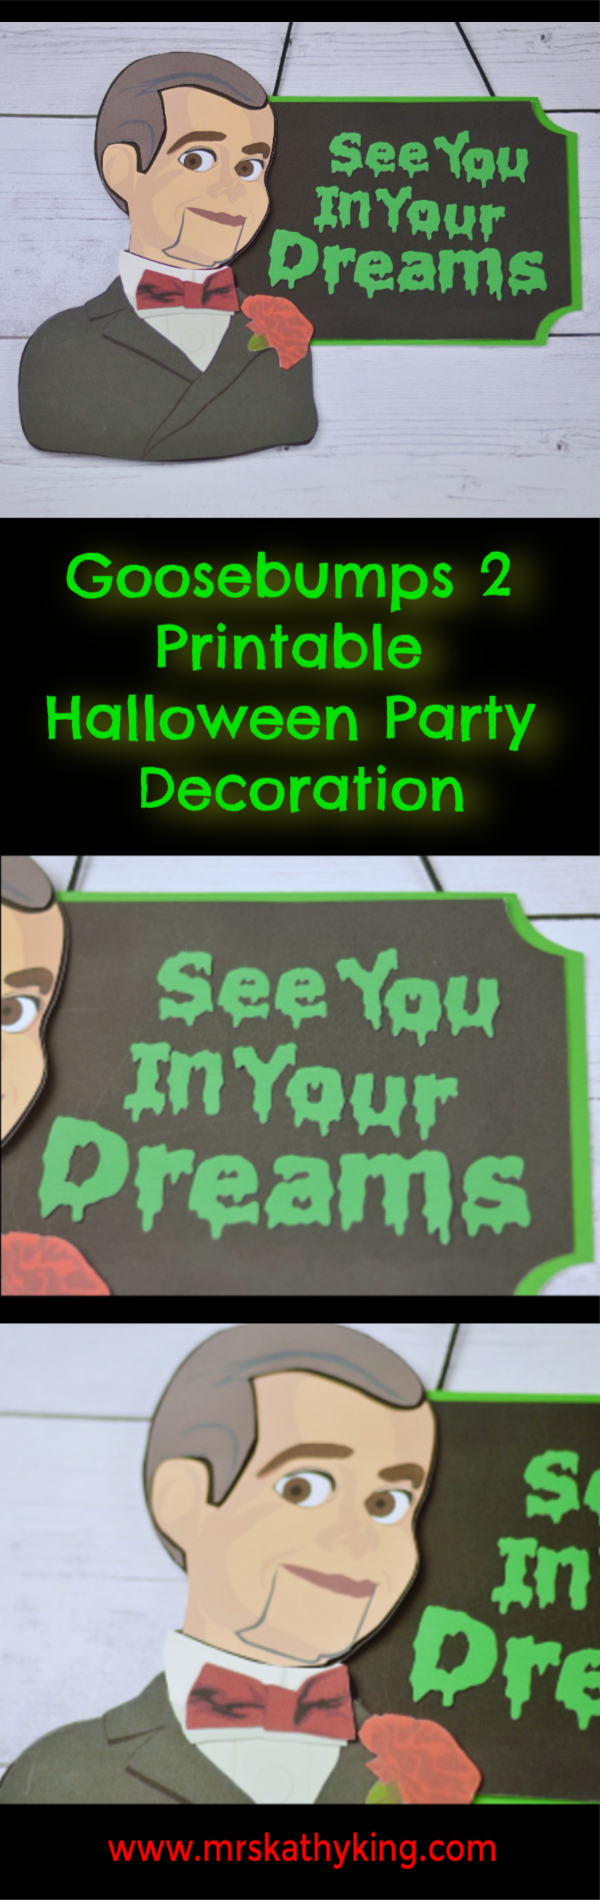 Looking for Halloween Decorations or Goosebumps Halloween decorations? I think you will love our Goosebumps 2 Printable Halloween Party Decoration. #Goosebumps, #halloweenDecorations , #Goosebumps2PartyDecorations #Goosebumps2movie